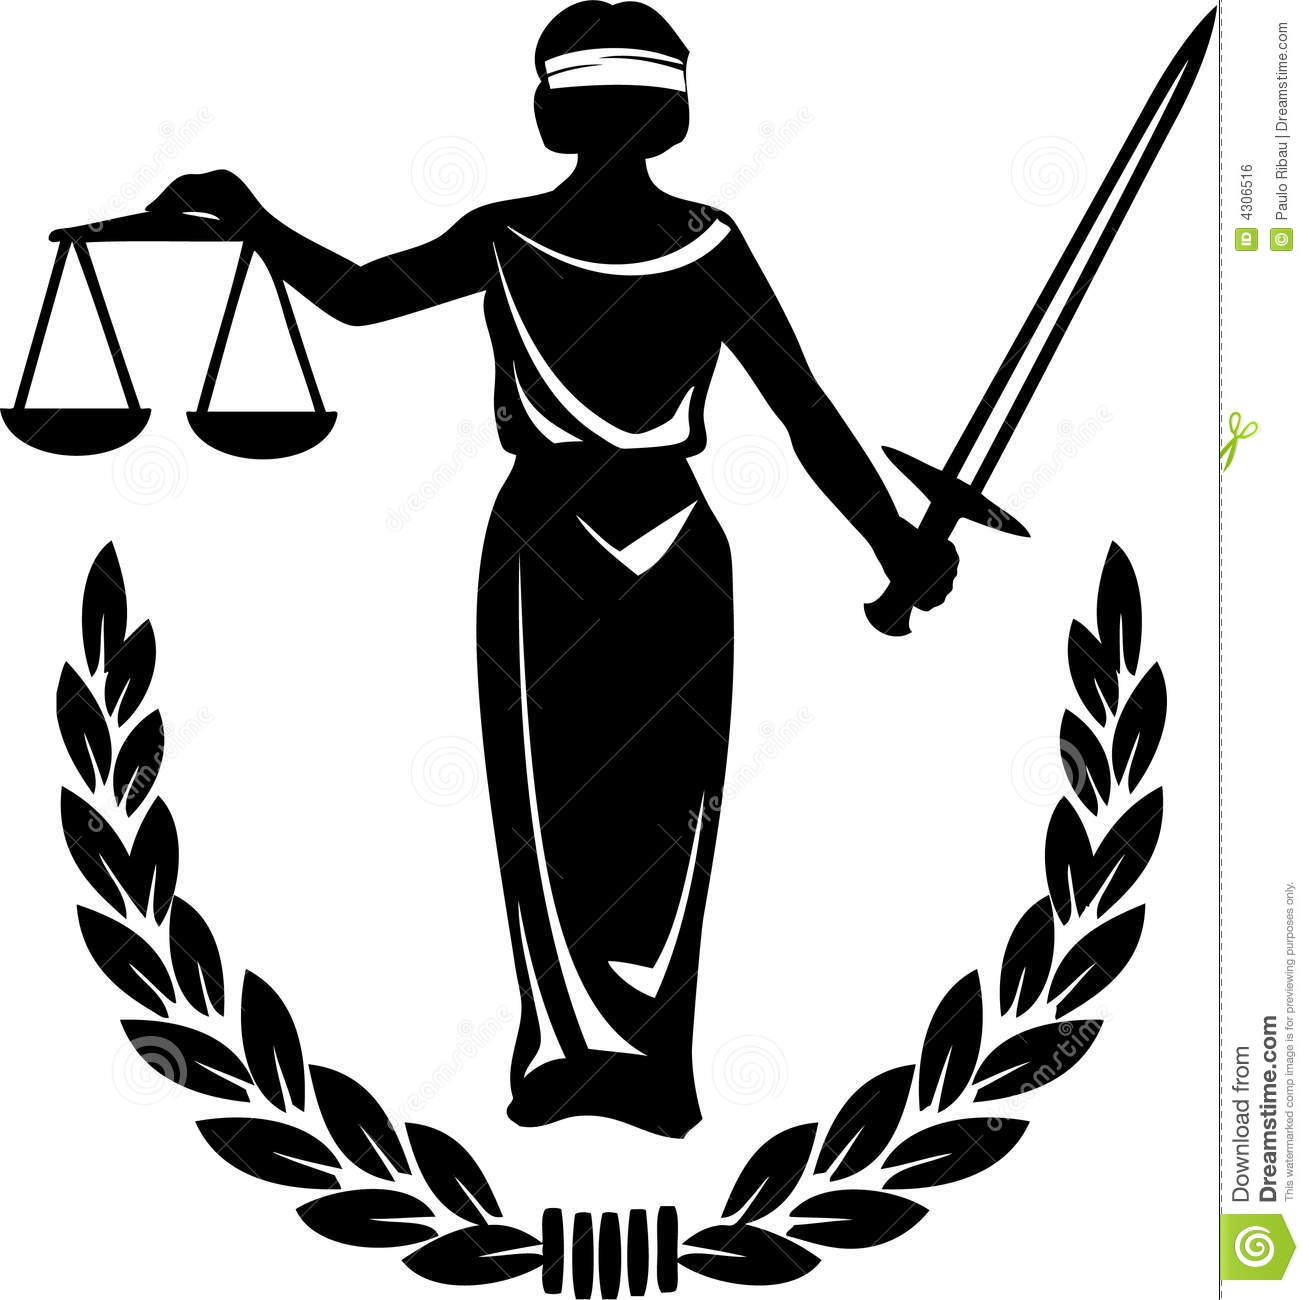 Illustration Of A Silhouette Holding The Scales Of Justice